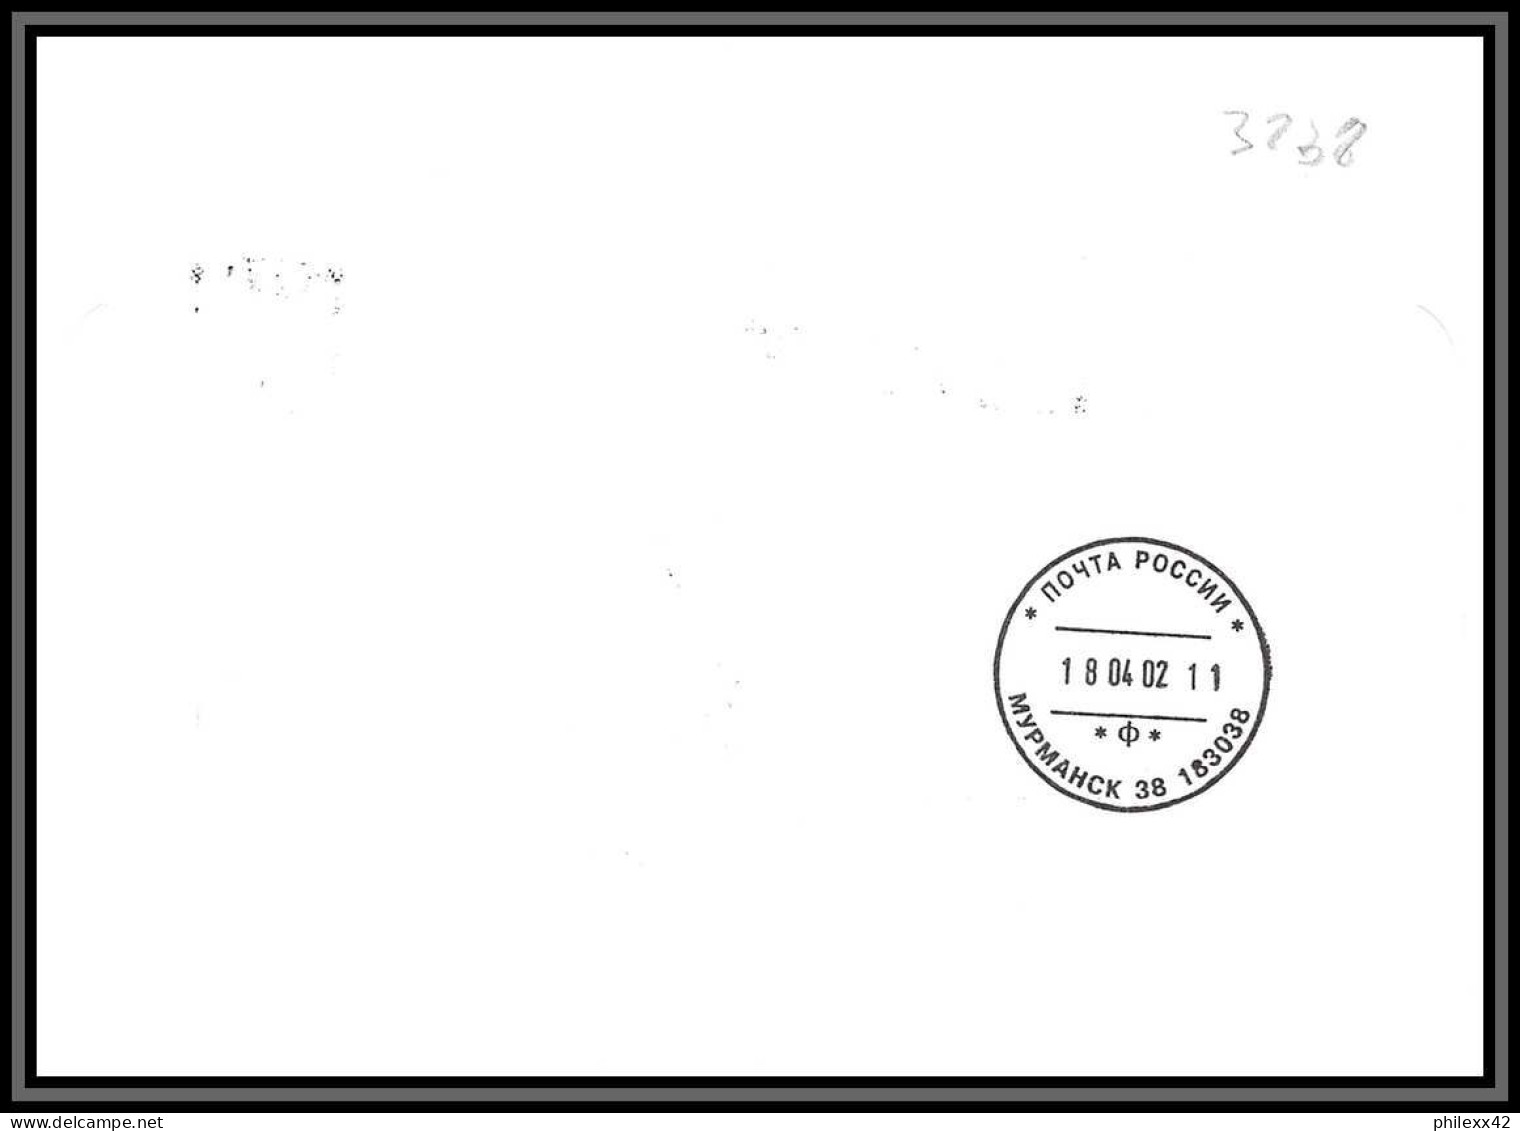 3238 Espace Space Raumfahrt Lettre Cover Briefe Cosmos Russie (Russia) 12/4/2002 Gagarine Gagarin Recommandé Registered - Russia & USSR